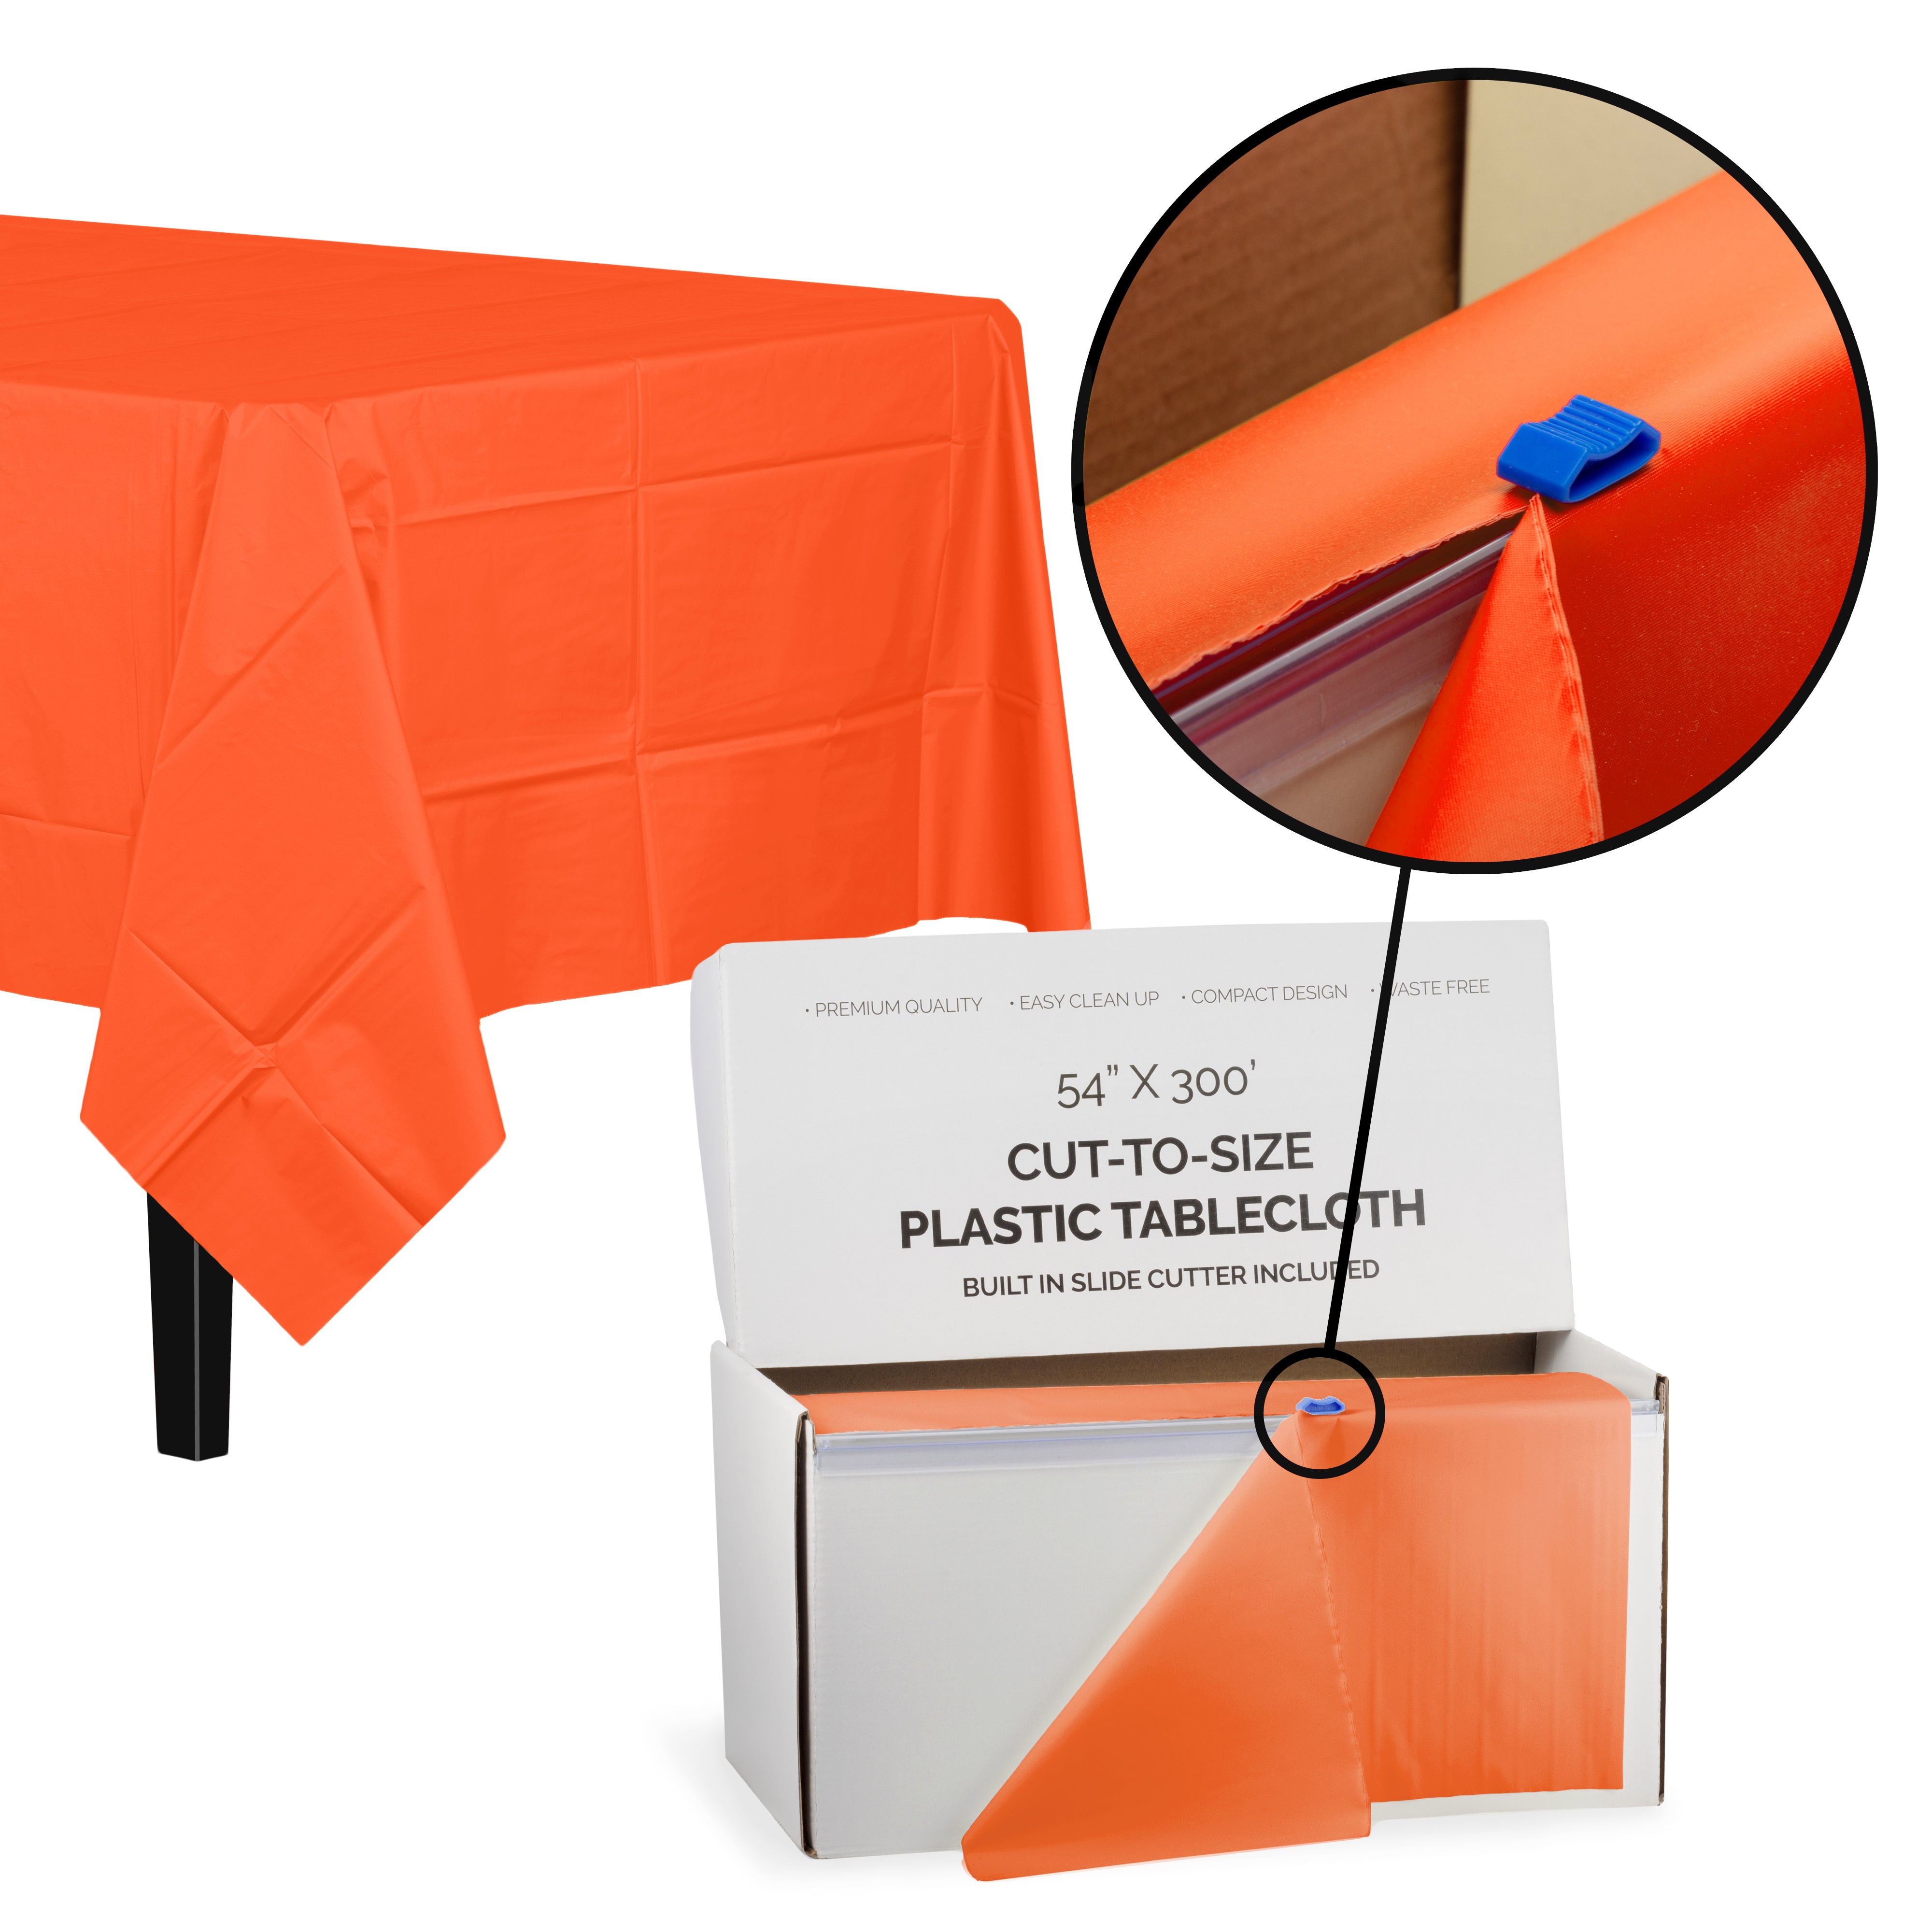 54" X 300' Cut To Size Orange Plastic Table Rolls | 4 Pack